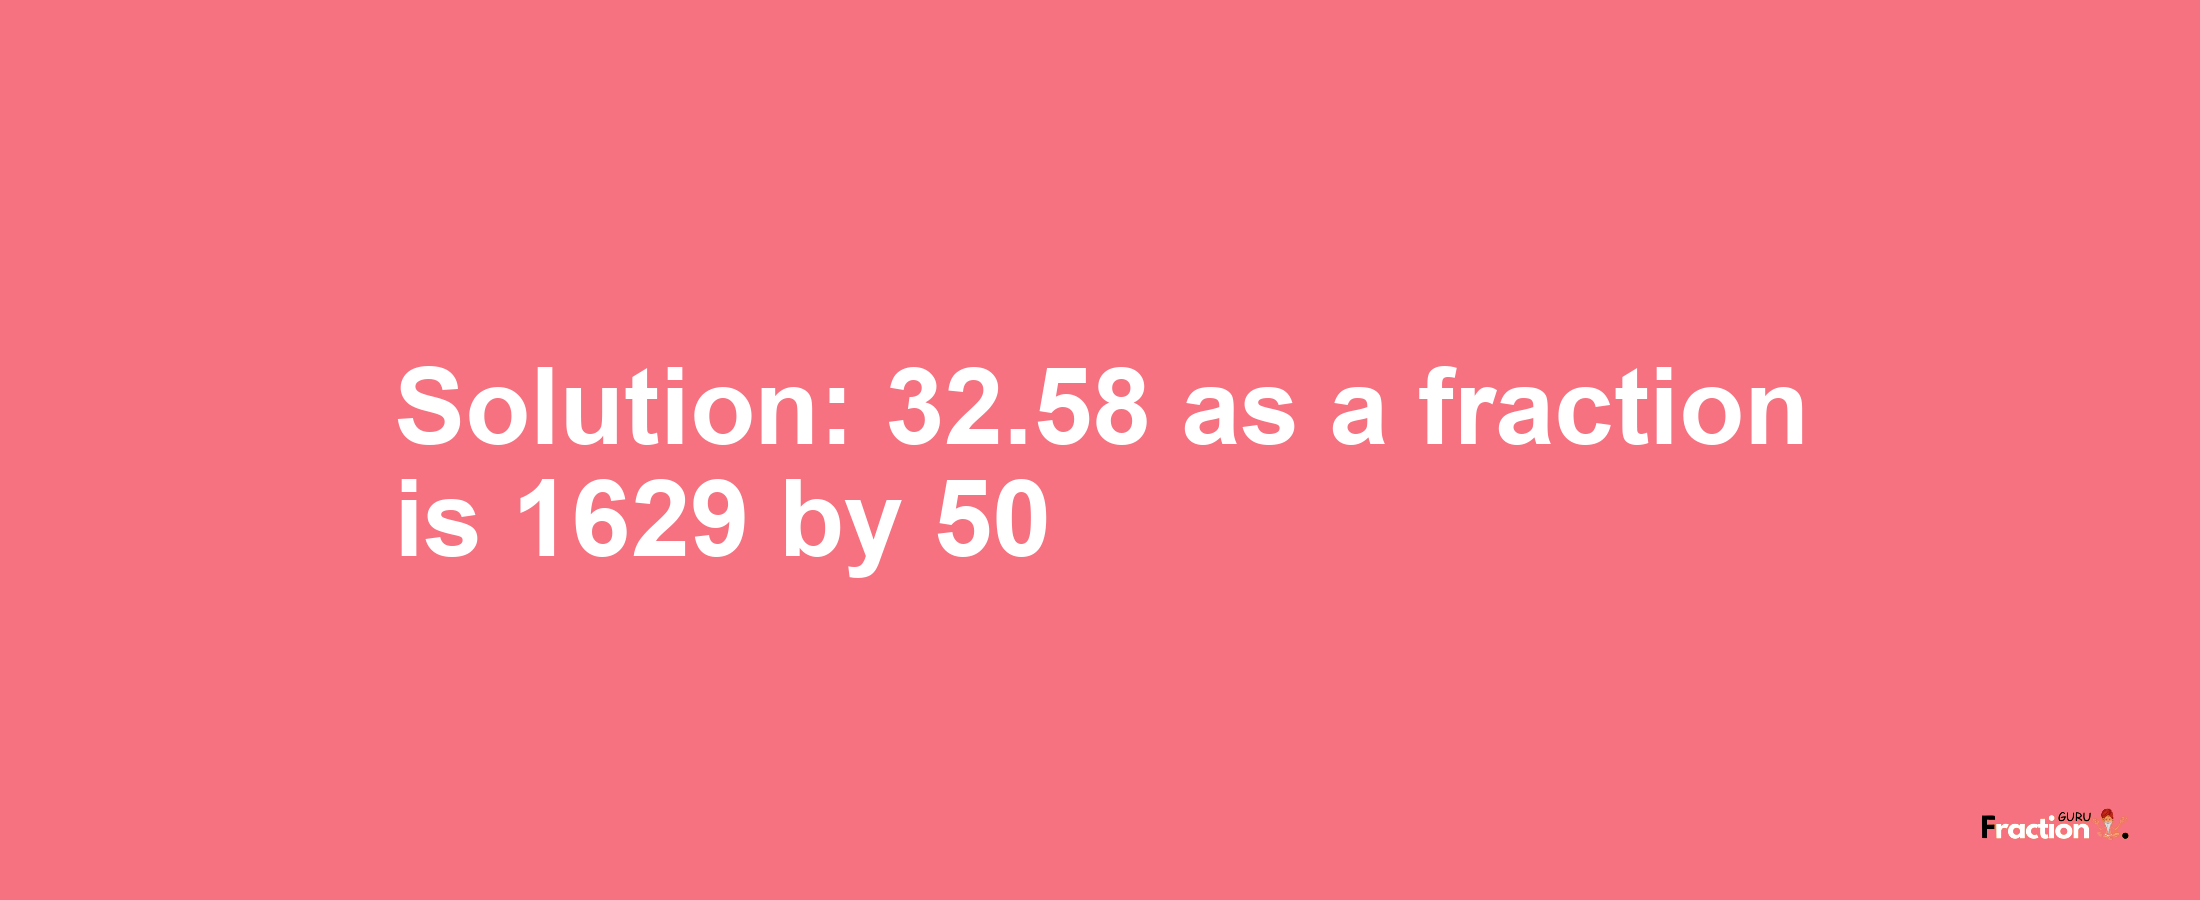 Solution:32.58 as a fraction is 1629/50